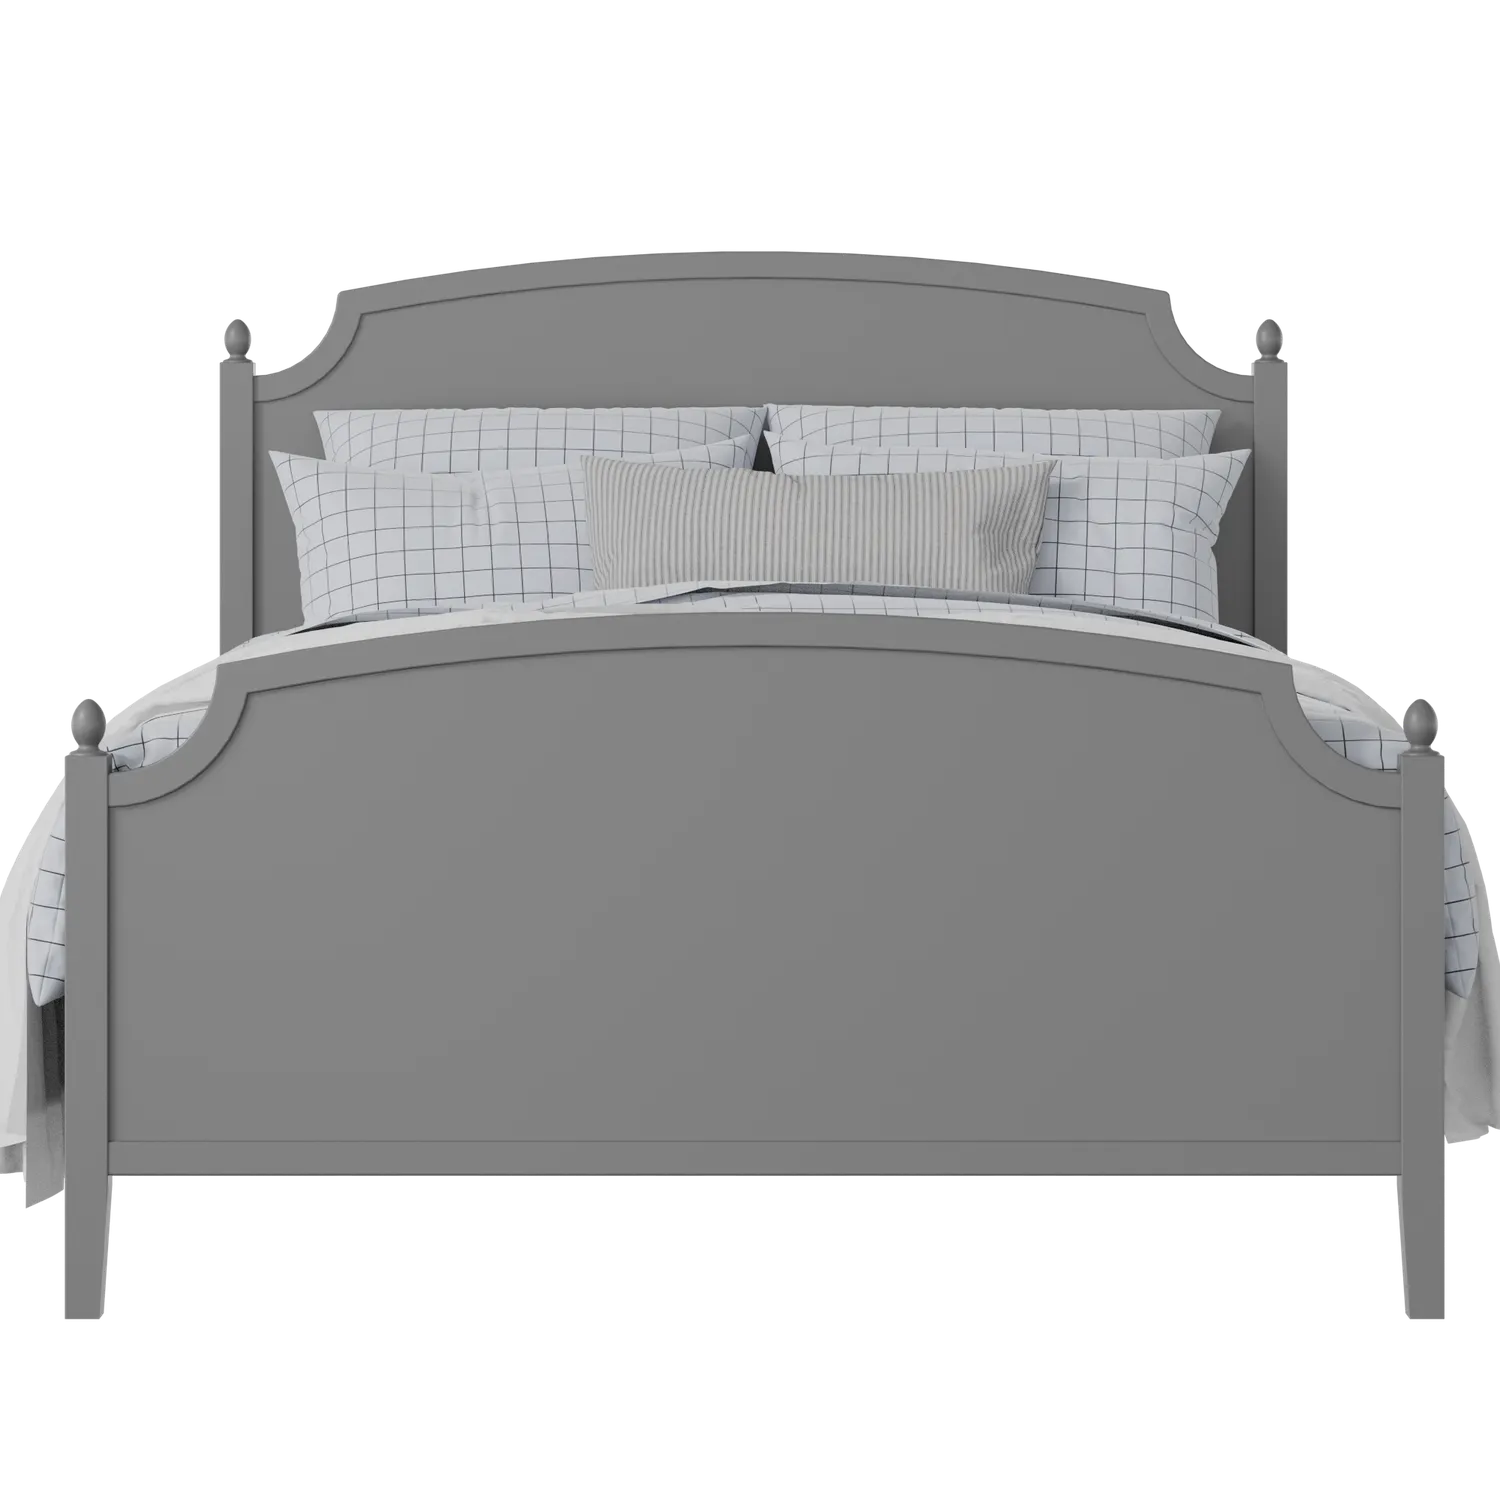 Kipling Painted painted wood bed in grey with Juno mattress